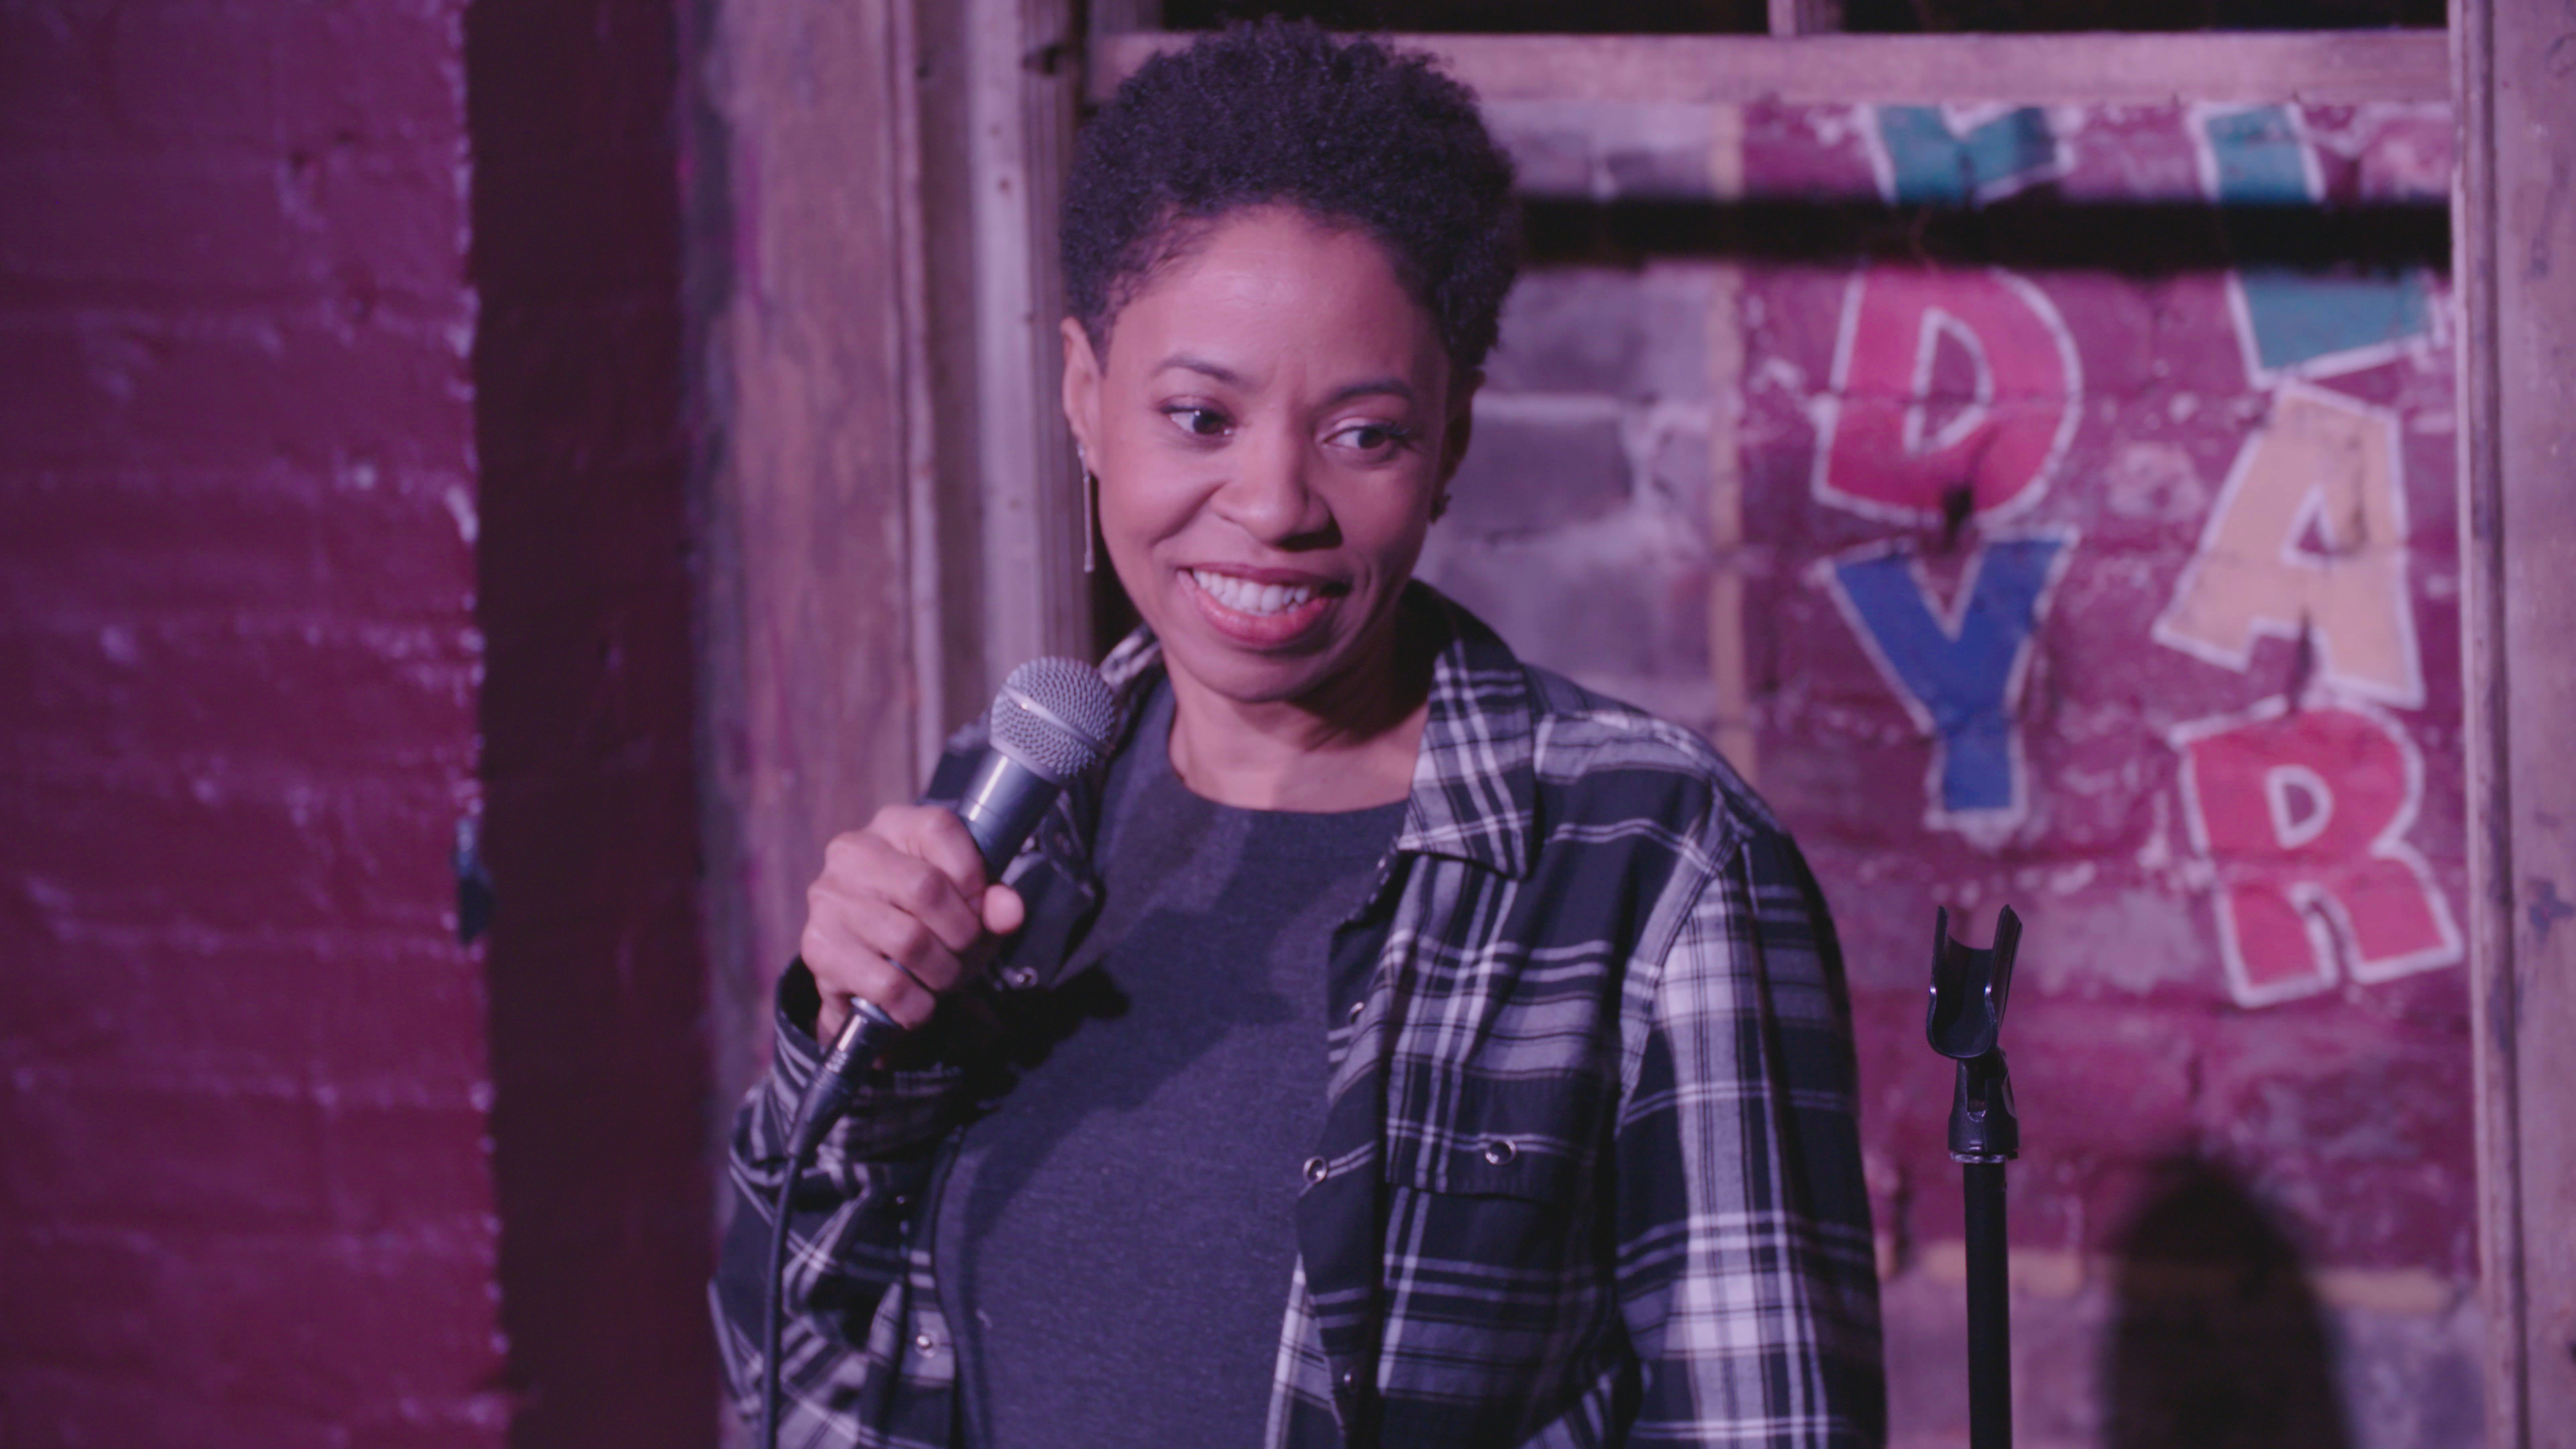 What’s It Like to Be a Woman in Stand-Up Comedy? It’s <i></noscript>
<p> </p>
<p>For comedienne Franklin, who shares her breast cancer diagnosis in the documentary and onstage, it provided some catharsis.</p>
<p>“It’s a healing journey. For me, that was the first time I ever had to talk about the fact that I could possibly die,” Franklin told reporters on a conference call.</p>
<p>“I was killing [onstage],” she continued. “But it was moments like that that you realize that you were always meant to be a comedian, too, because when you have real intense moments like that, and you can make people laugh with it. And it makes you feel good, and it makes them feel good.”</p>
<p><span style=